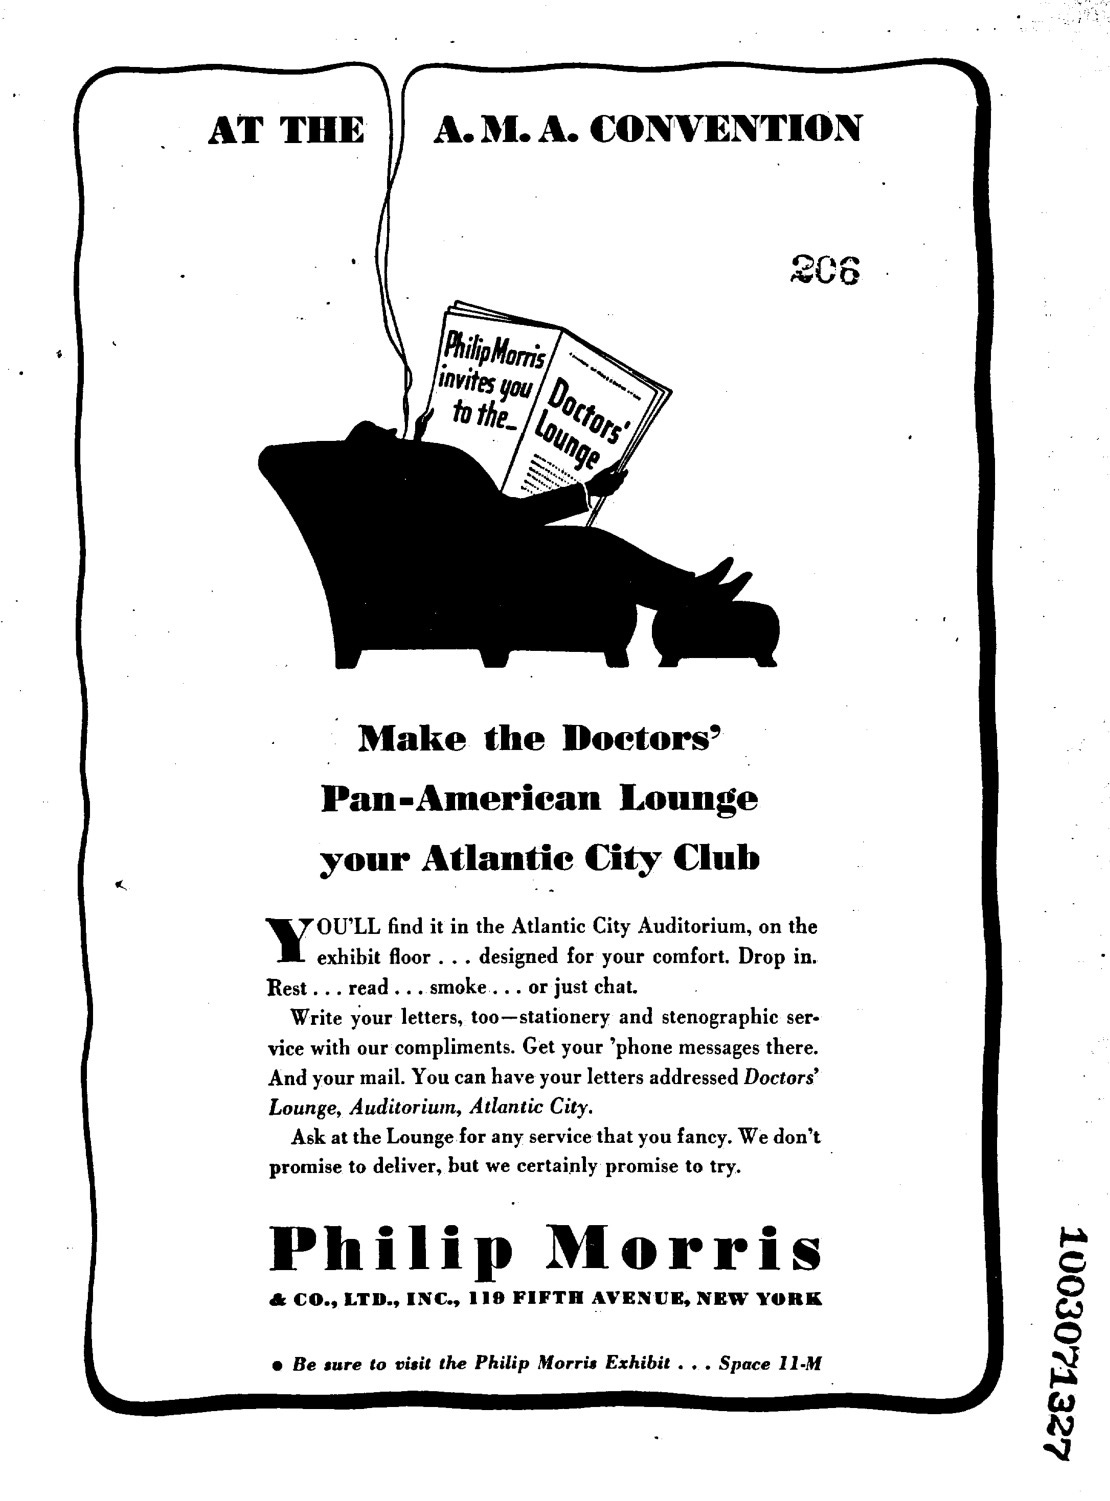 This simple black and white advertisement shows the silhouette of a man lying back in an armchair. Lines implying smoke rise from him to the top of the image. He is reading a newspaper with the words ‘Philip Morris invites you to the Doctors’ lounge.’ The rest of the advert is text inviting readers to attend this lounge at the American Medical Association convention.